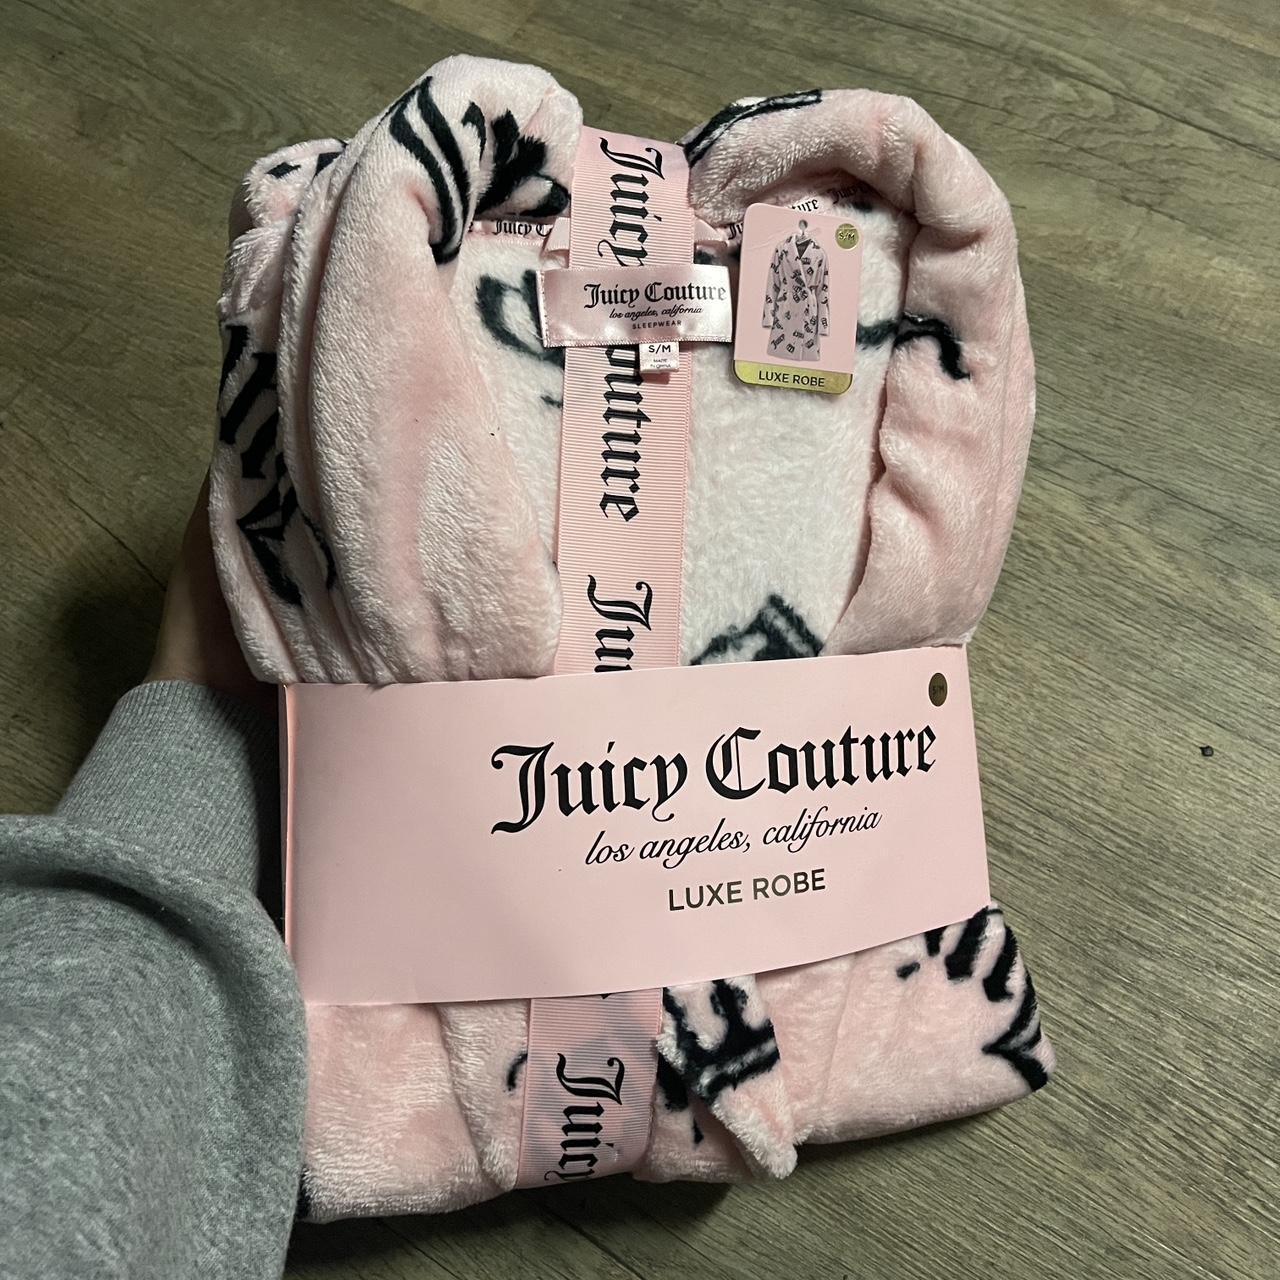 Women's Juicy Couture Lingerie, New & Used